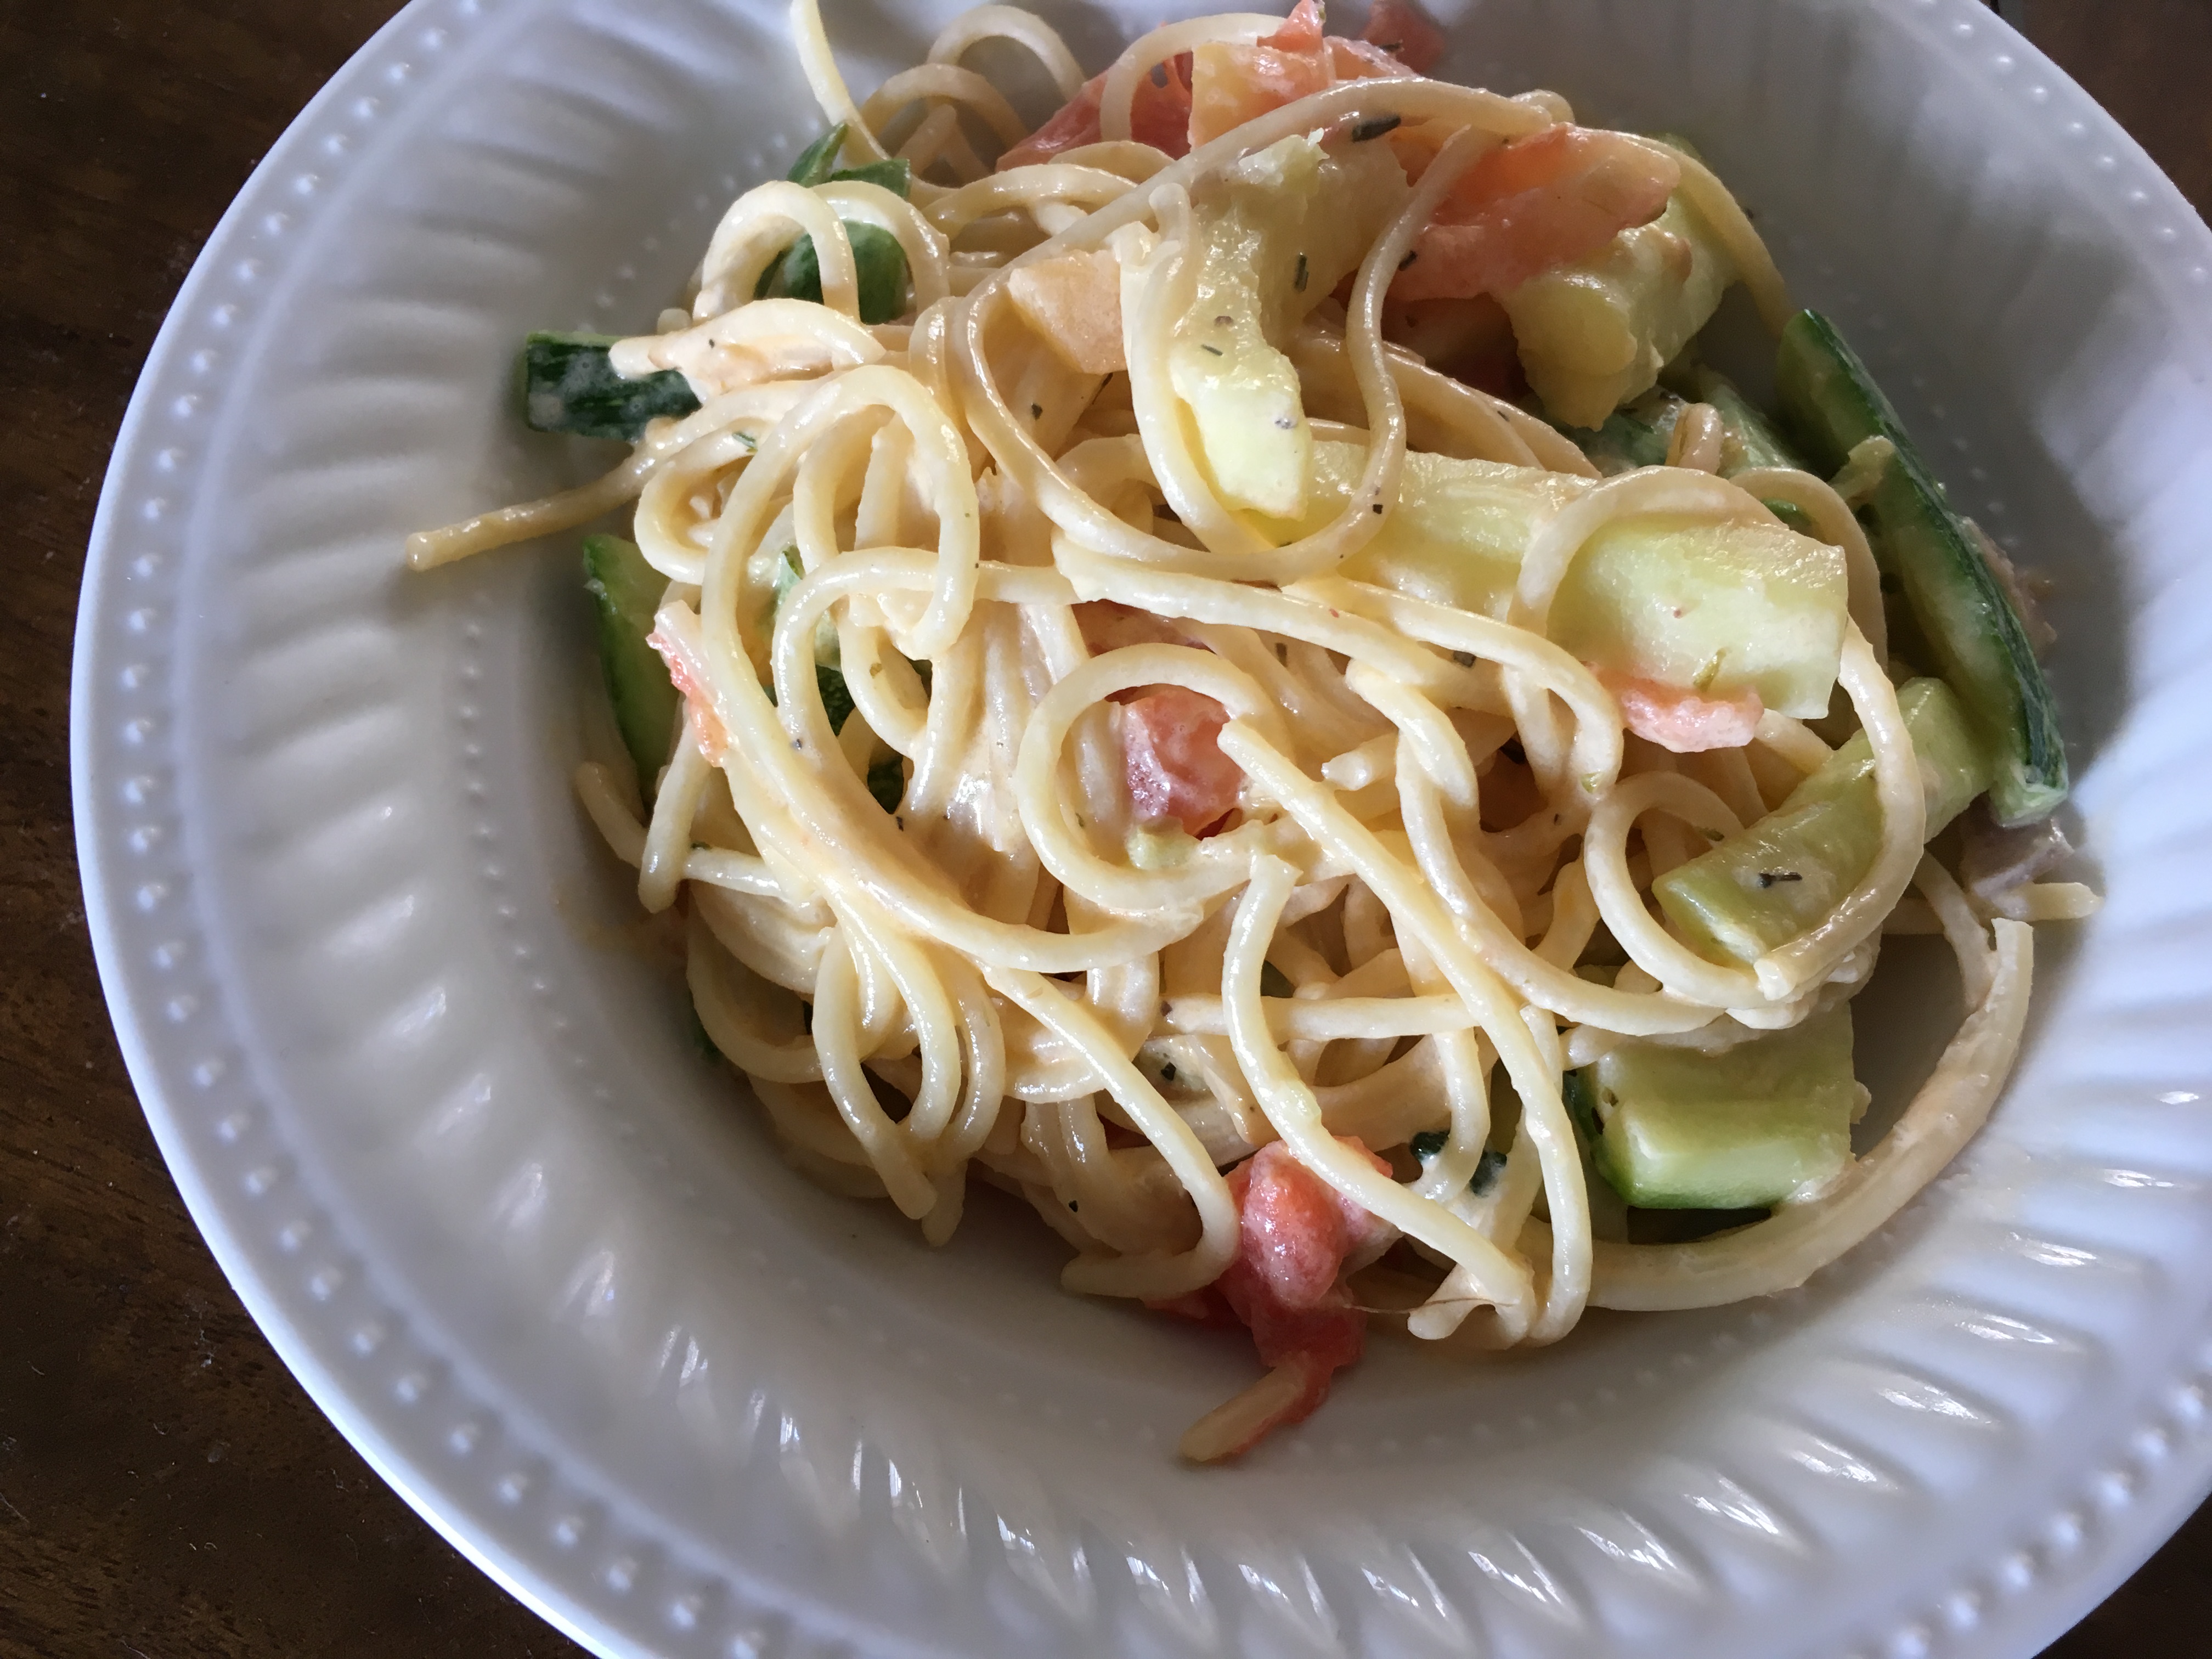 <p>Five stars for this creamy, vegetarian spaghetti recipe with ripe tomatoes, Greek feta cheese, garlic, and zucchini. Quick to cook and so delicious — it's sure to become a family favorite!</p>
                          